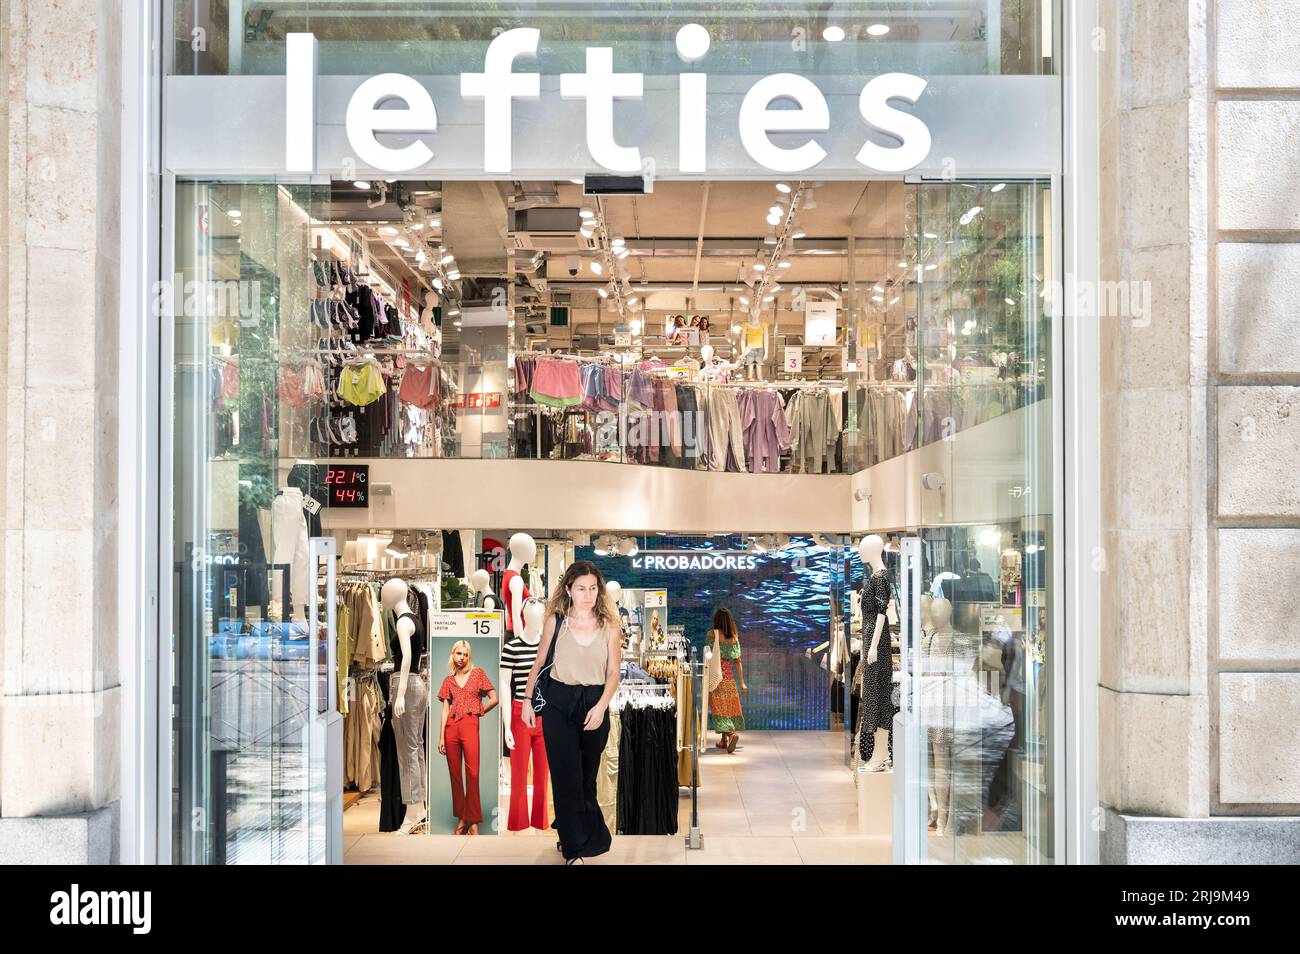 Madrid Spain 21st Aug 2023 A Woman Leaves The Spanish Fashion Brand Owned By Inditex Lefties Store In Spain Photo By Xavi Lopezsopa Imagessipa Usa Credit Sipa Usaalamy Live News 2RJ9M49 